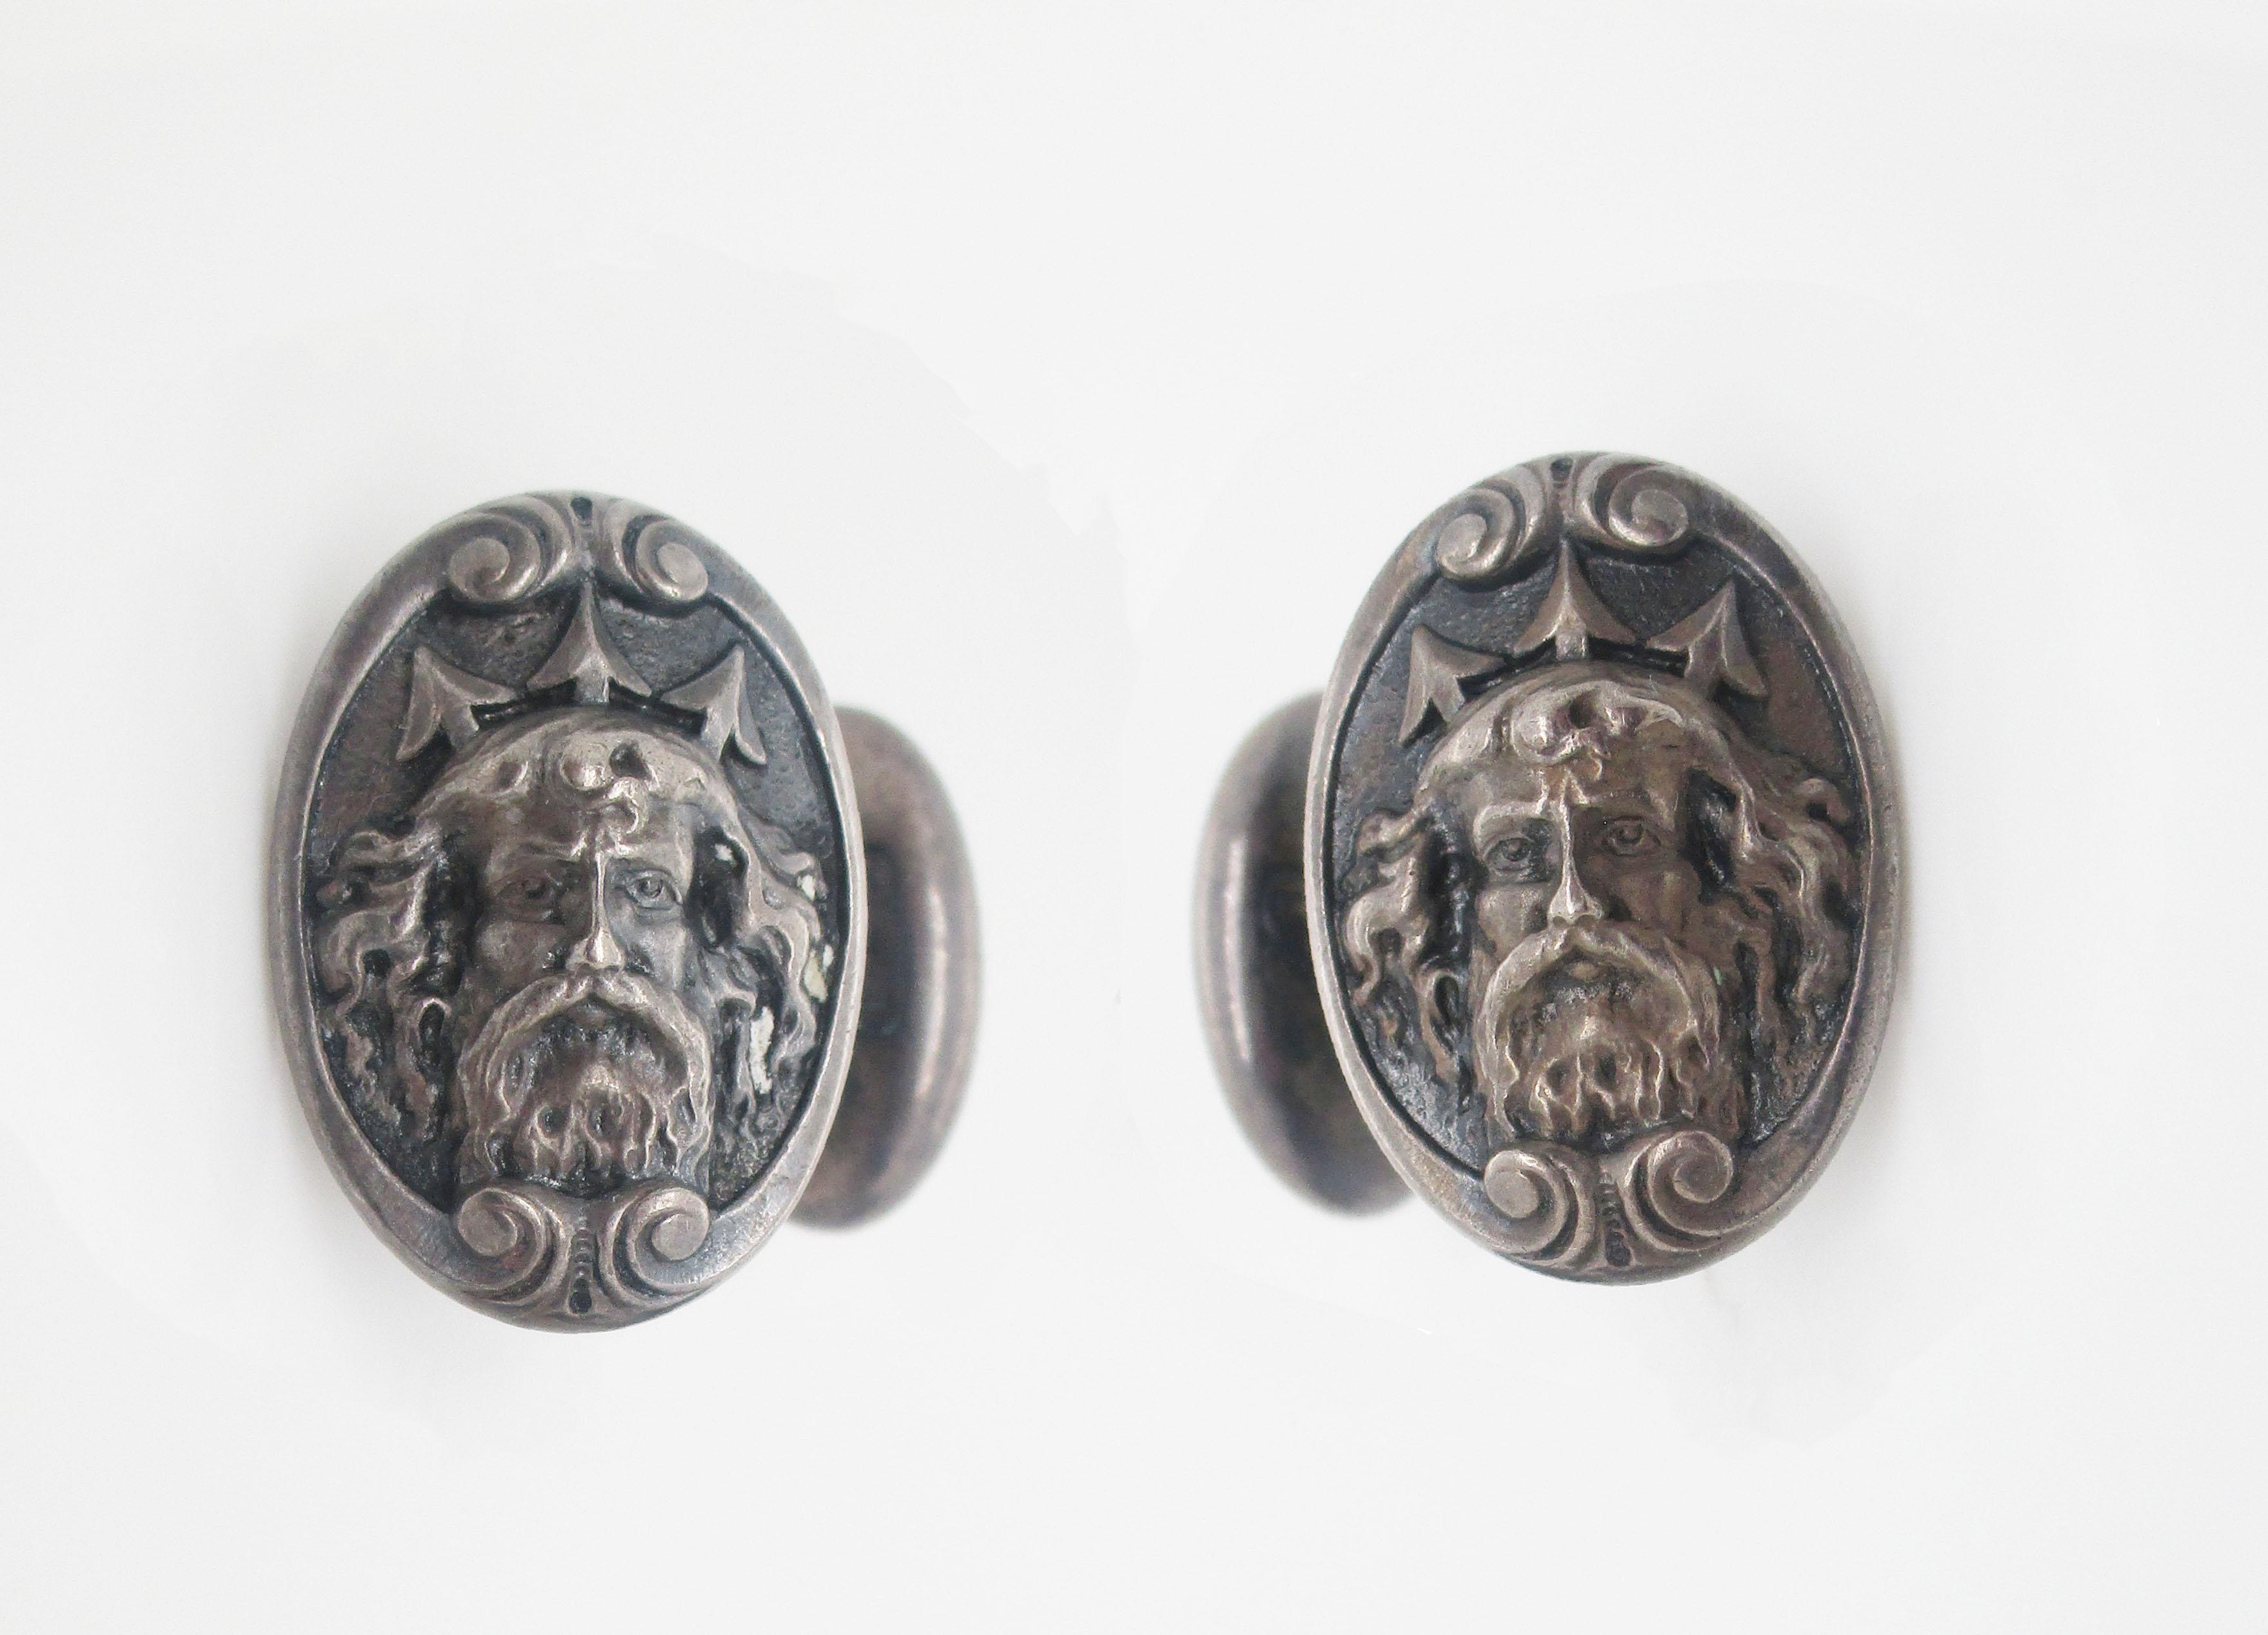 These incredible cufflinks are in sterling silver and feature a fantastically ornate depiction of the sea god Poseidon or Neptune. The detail of the portrait is remarkable-even the hairs of his beard are detailed! The incredibly unique look of these